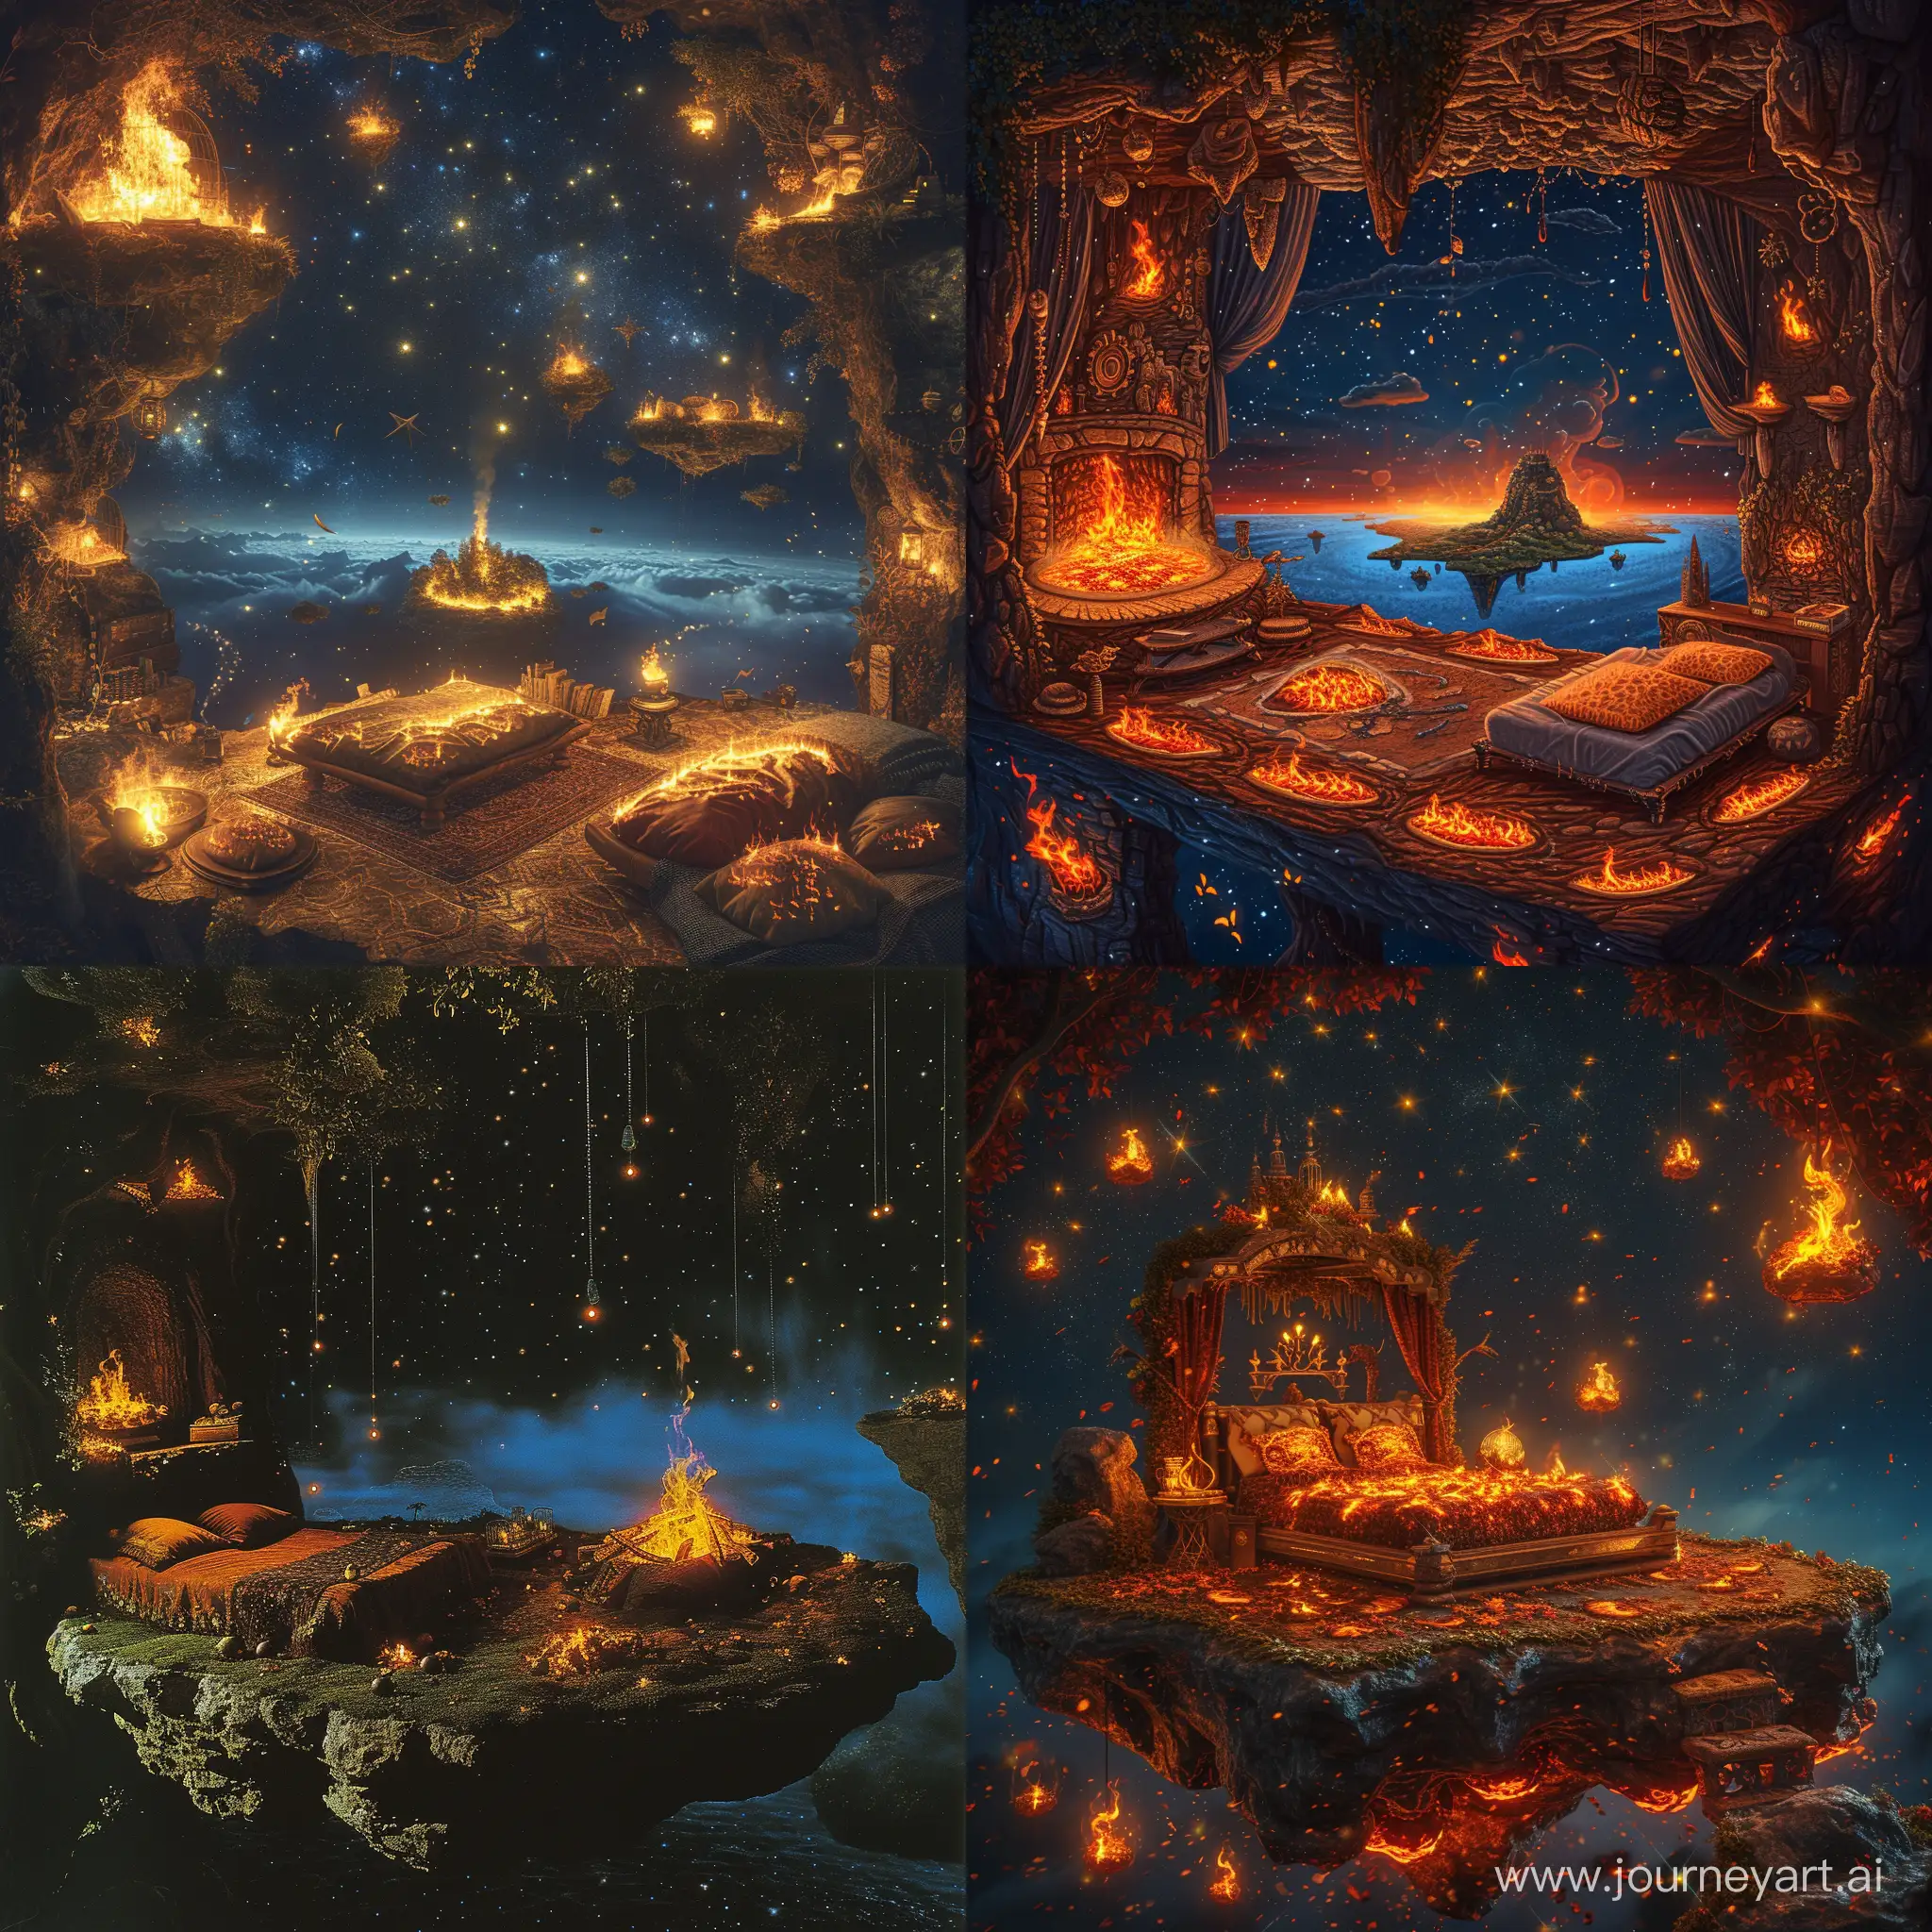 Enchanting-Nighttime-Bedroom-with-Ethereal-Flames-and-1970s-Dark-Fantasy-Aesthetic